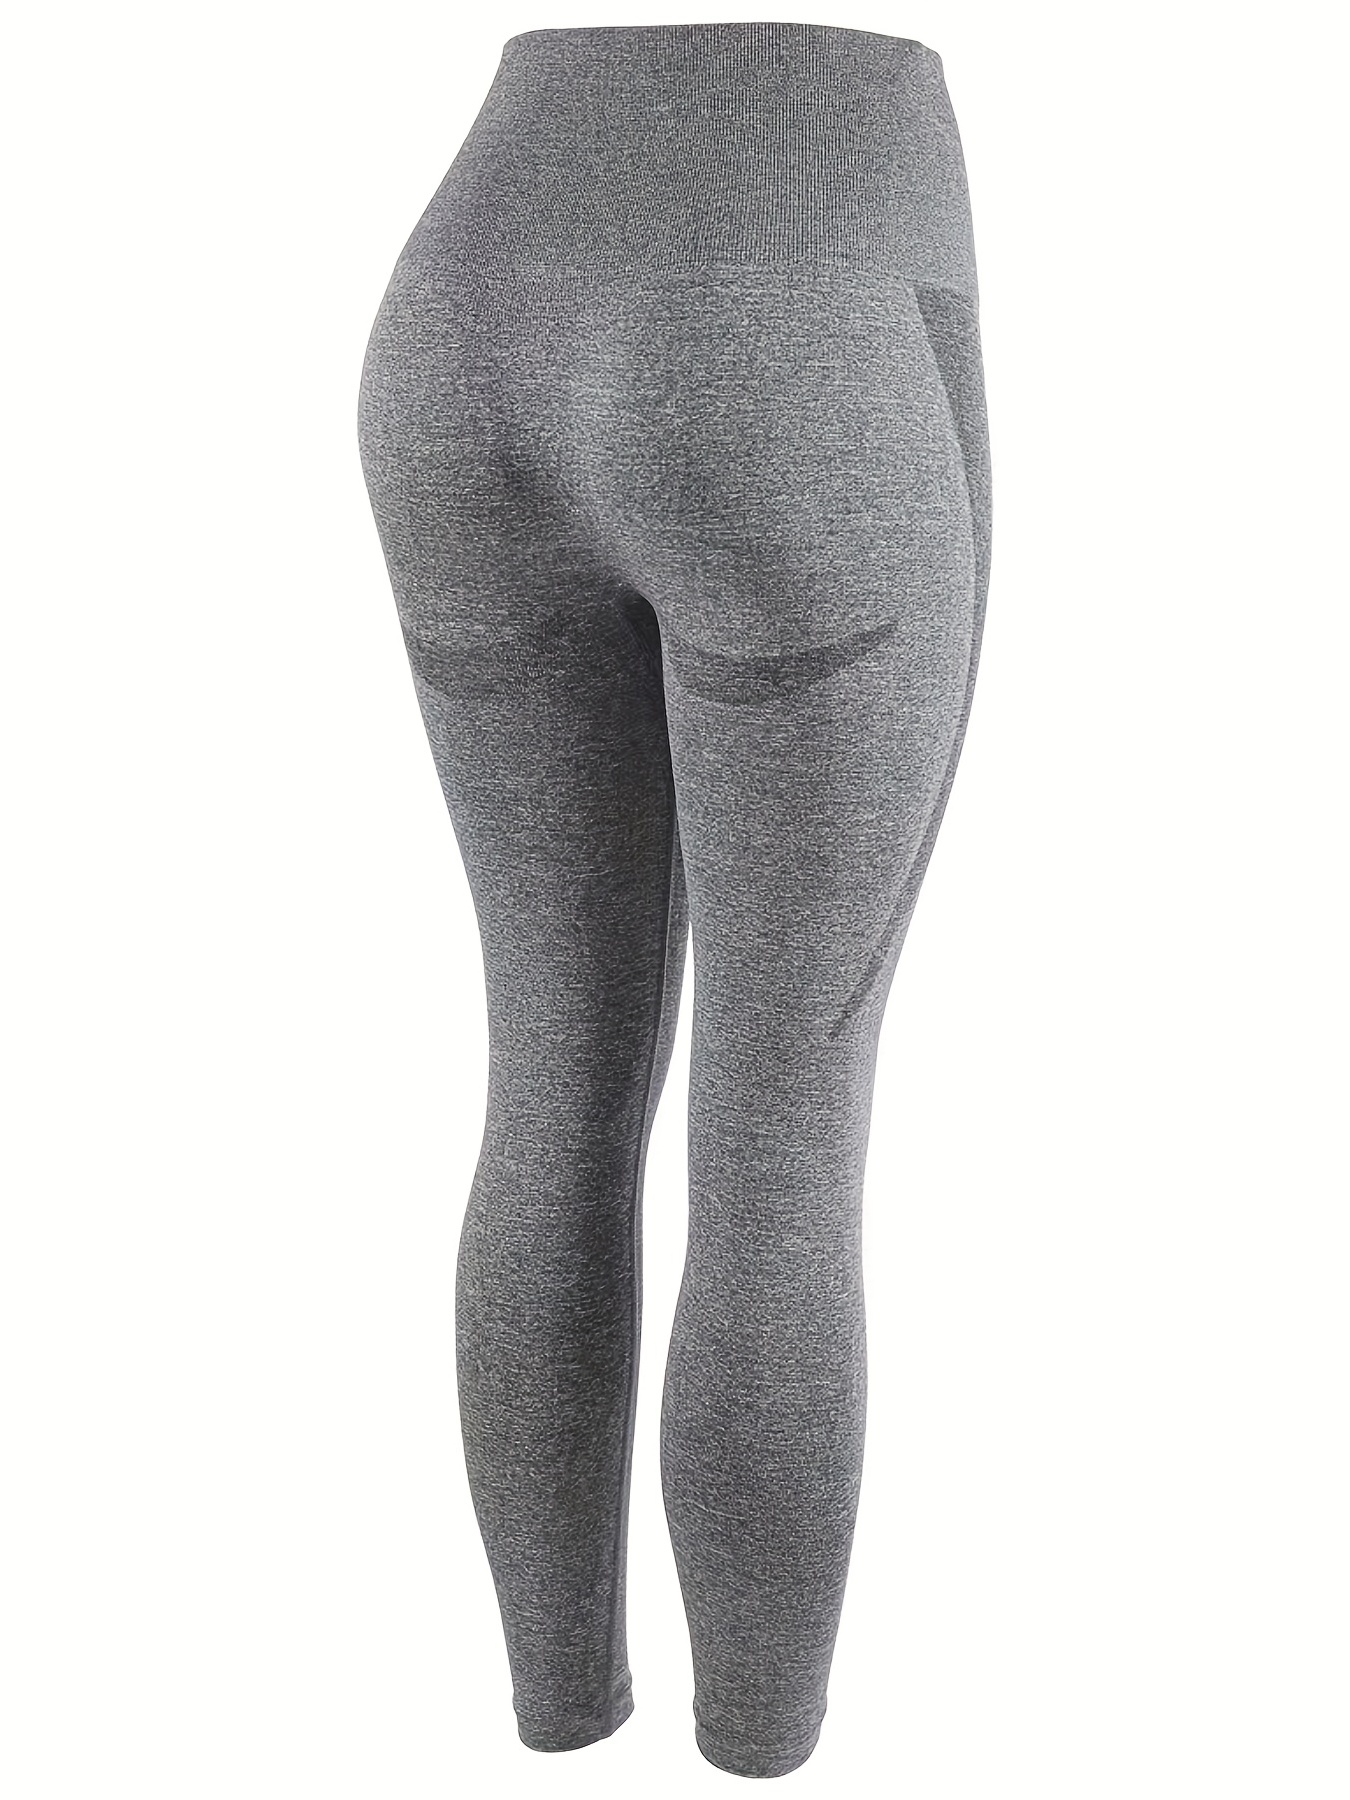 TOWED22 Womens Leggings Tummy Control,Leggings for Women Winter Thermal  Insulated Leggings High Waisted Workout Yoga Pants Plus Size(Grey,S) 